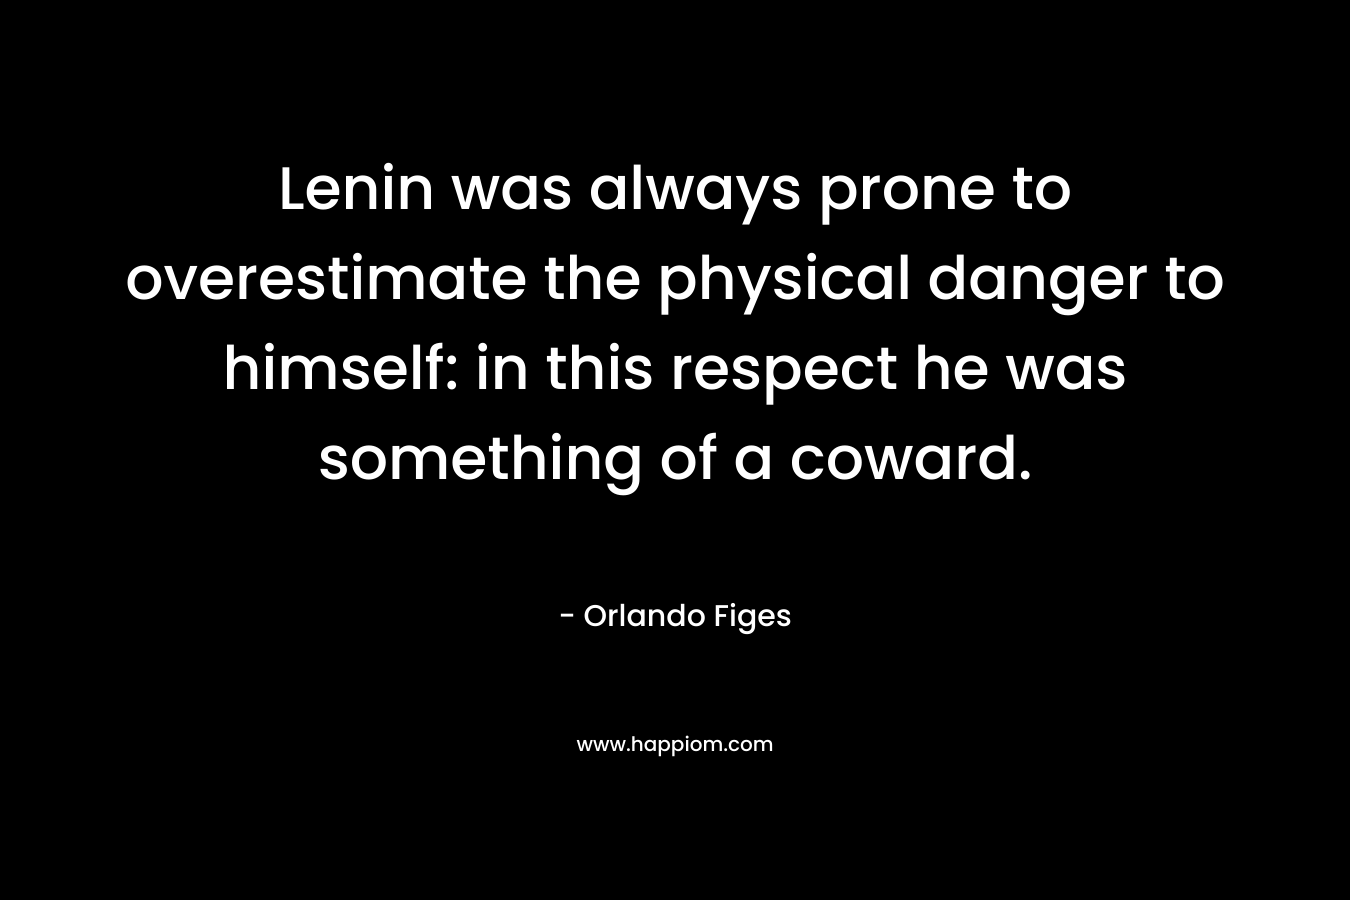 Lenin was always prone to overestimate the physical danger to himself: in this respect he was something of a coward. – Orlando Figes